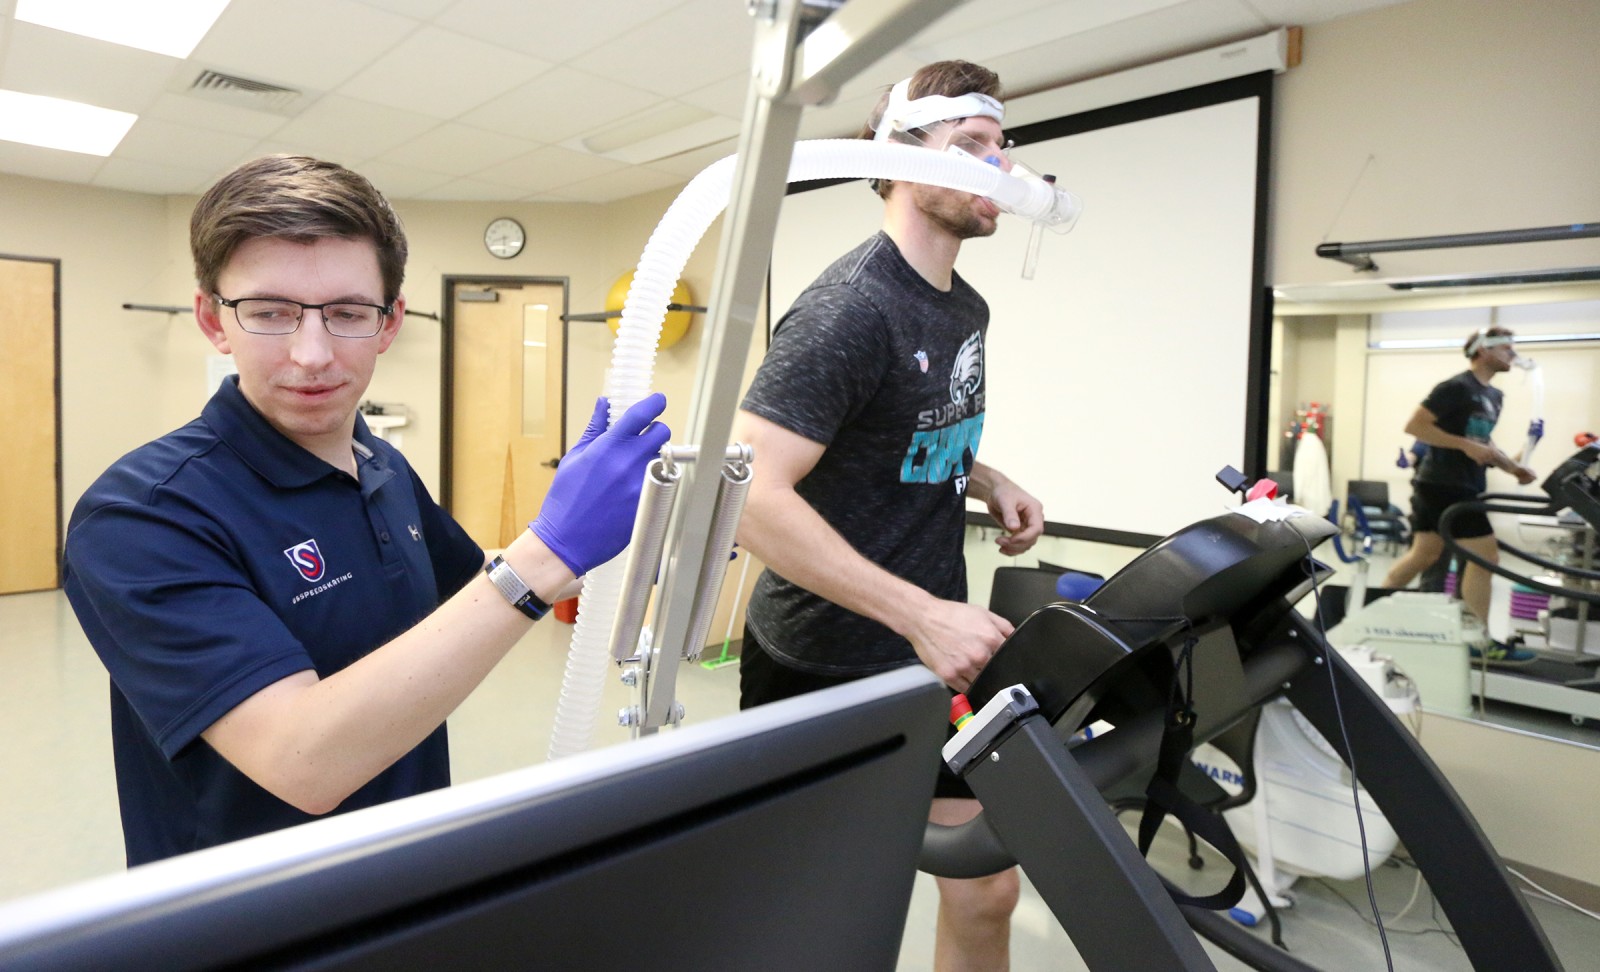 CWI Health Science Offers Free Fitness Training Program for Employees